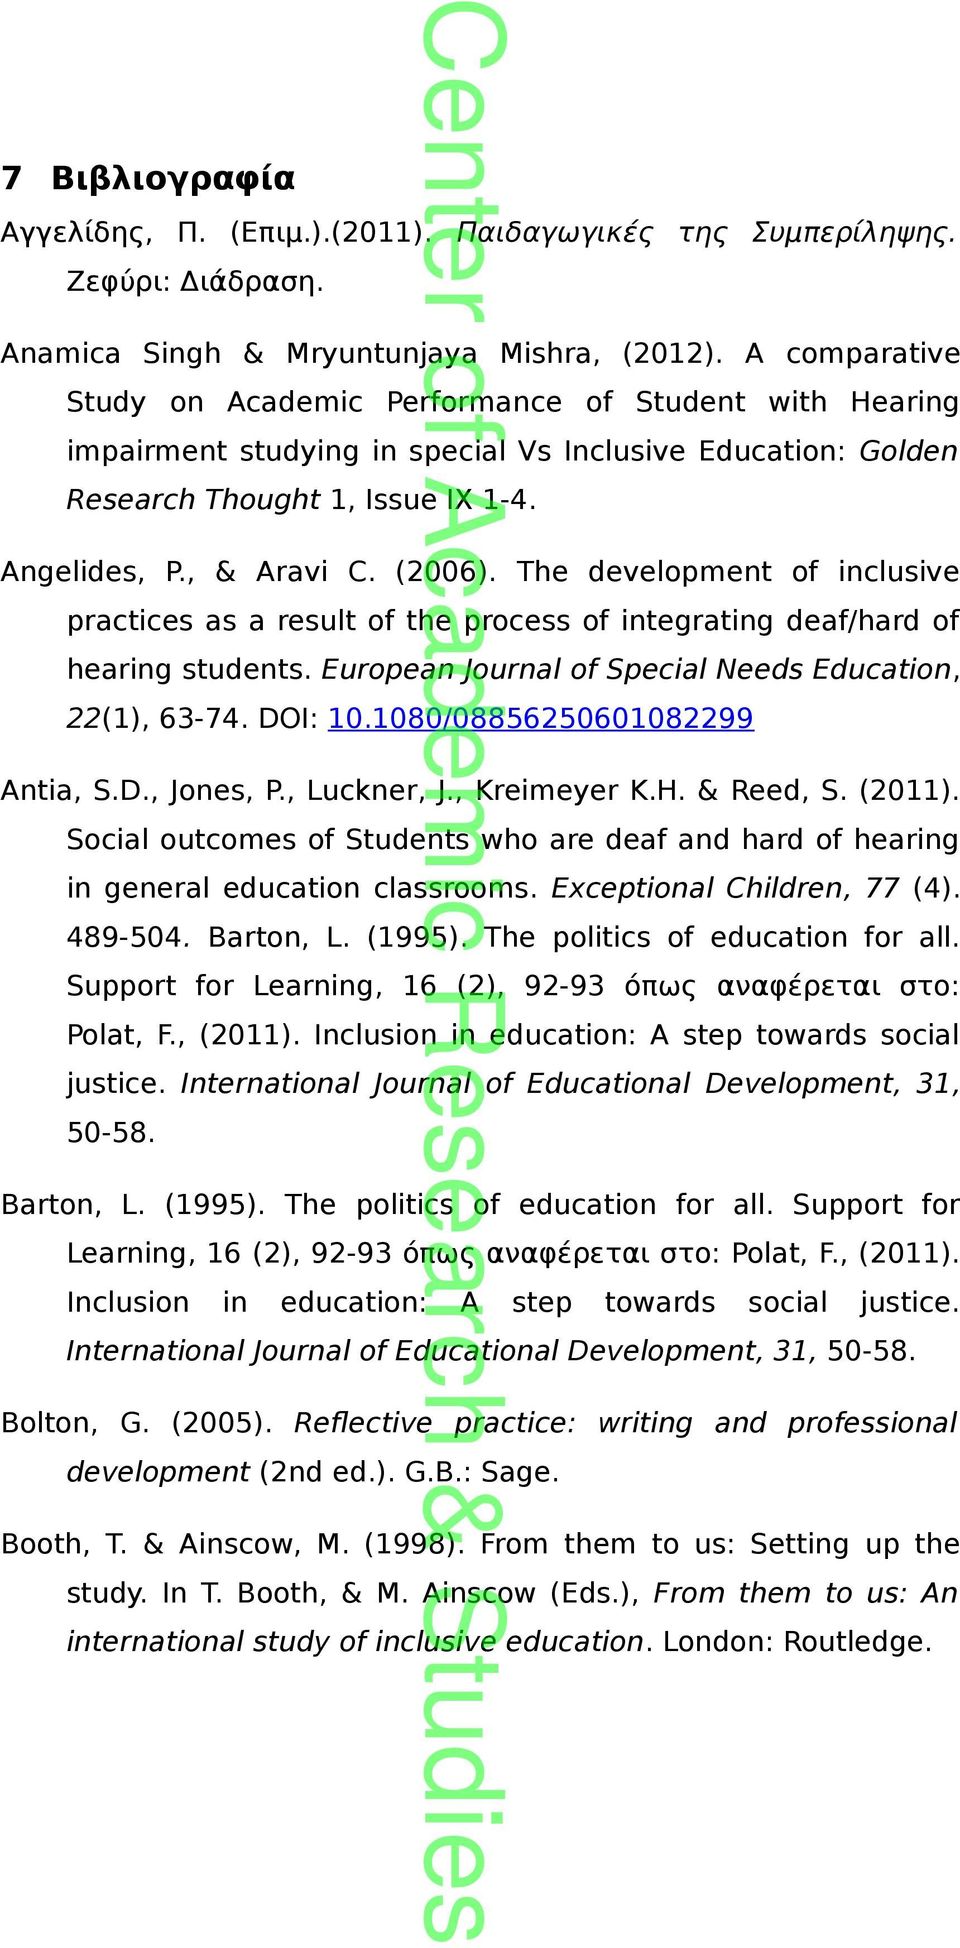 The development of inclusive practices as a result of the process of integrating deaf/hard of hearing students. European Journal of Special Needs Education, 22(1), 63-74. DOI: 10.